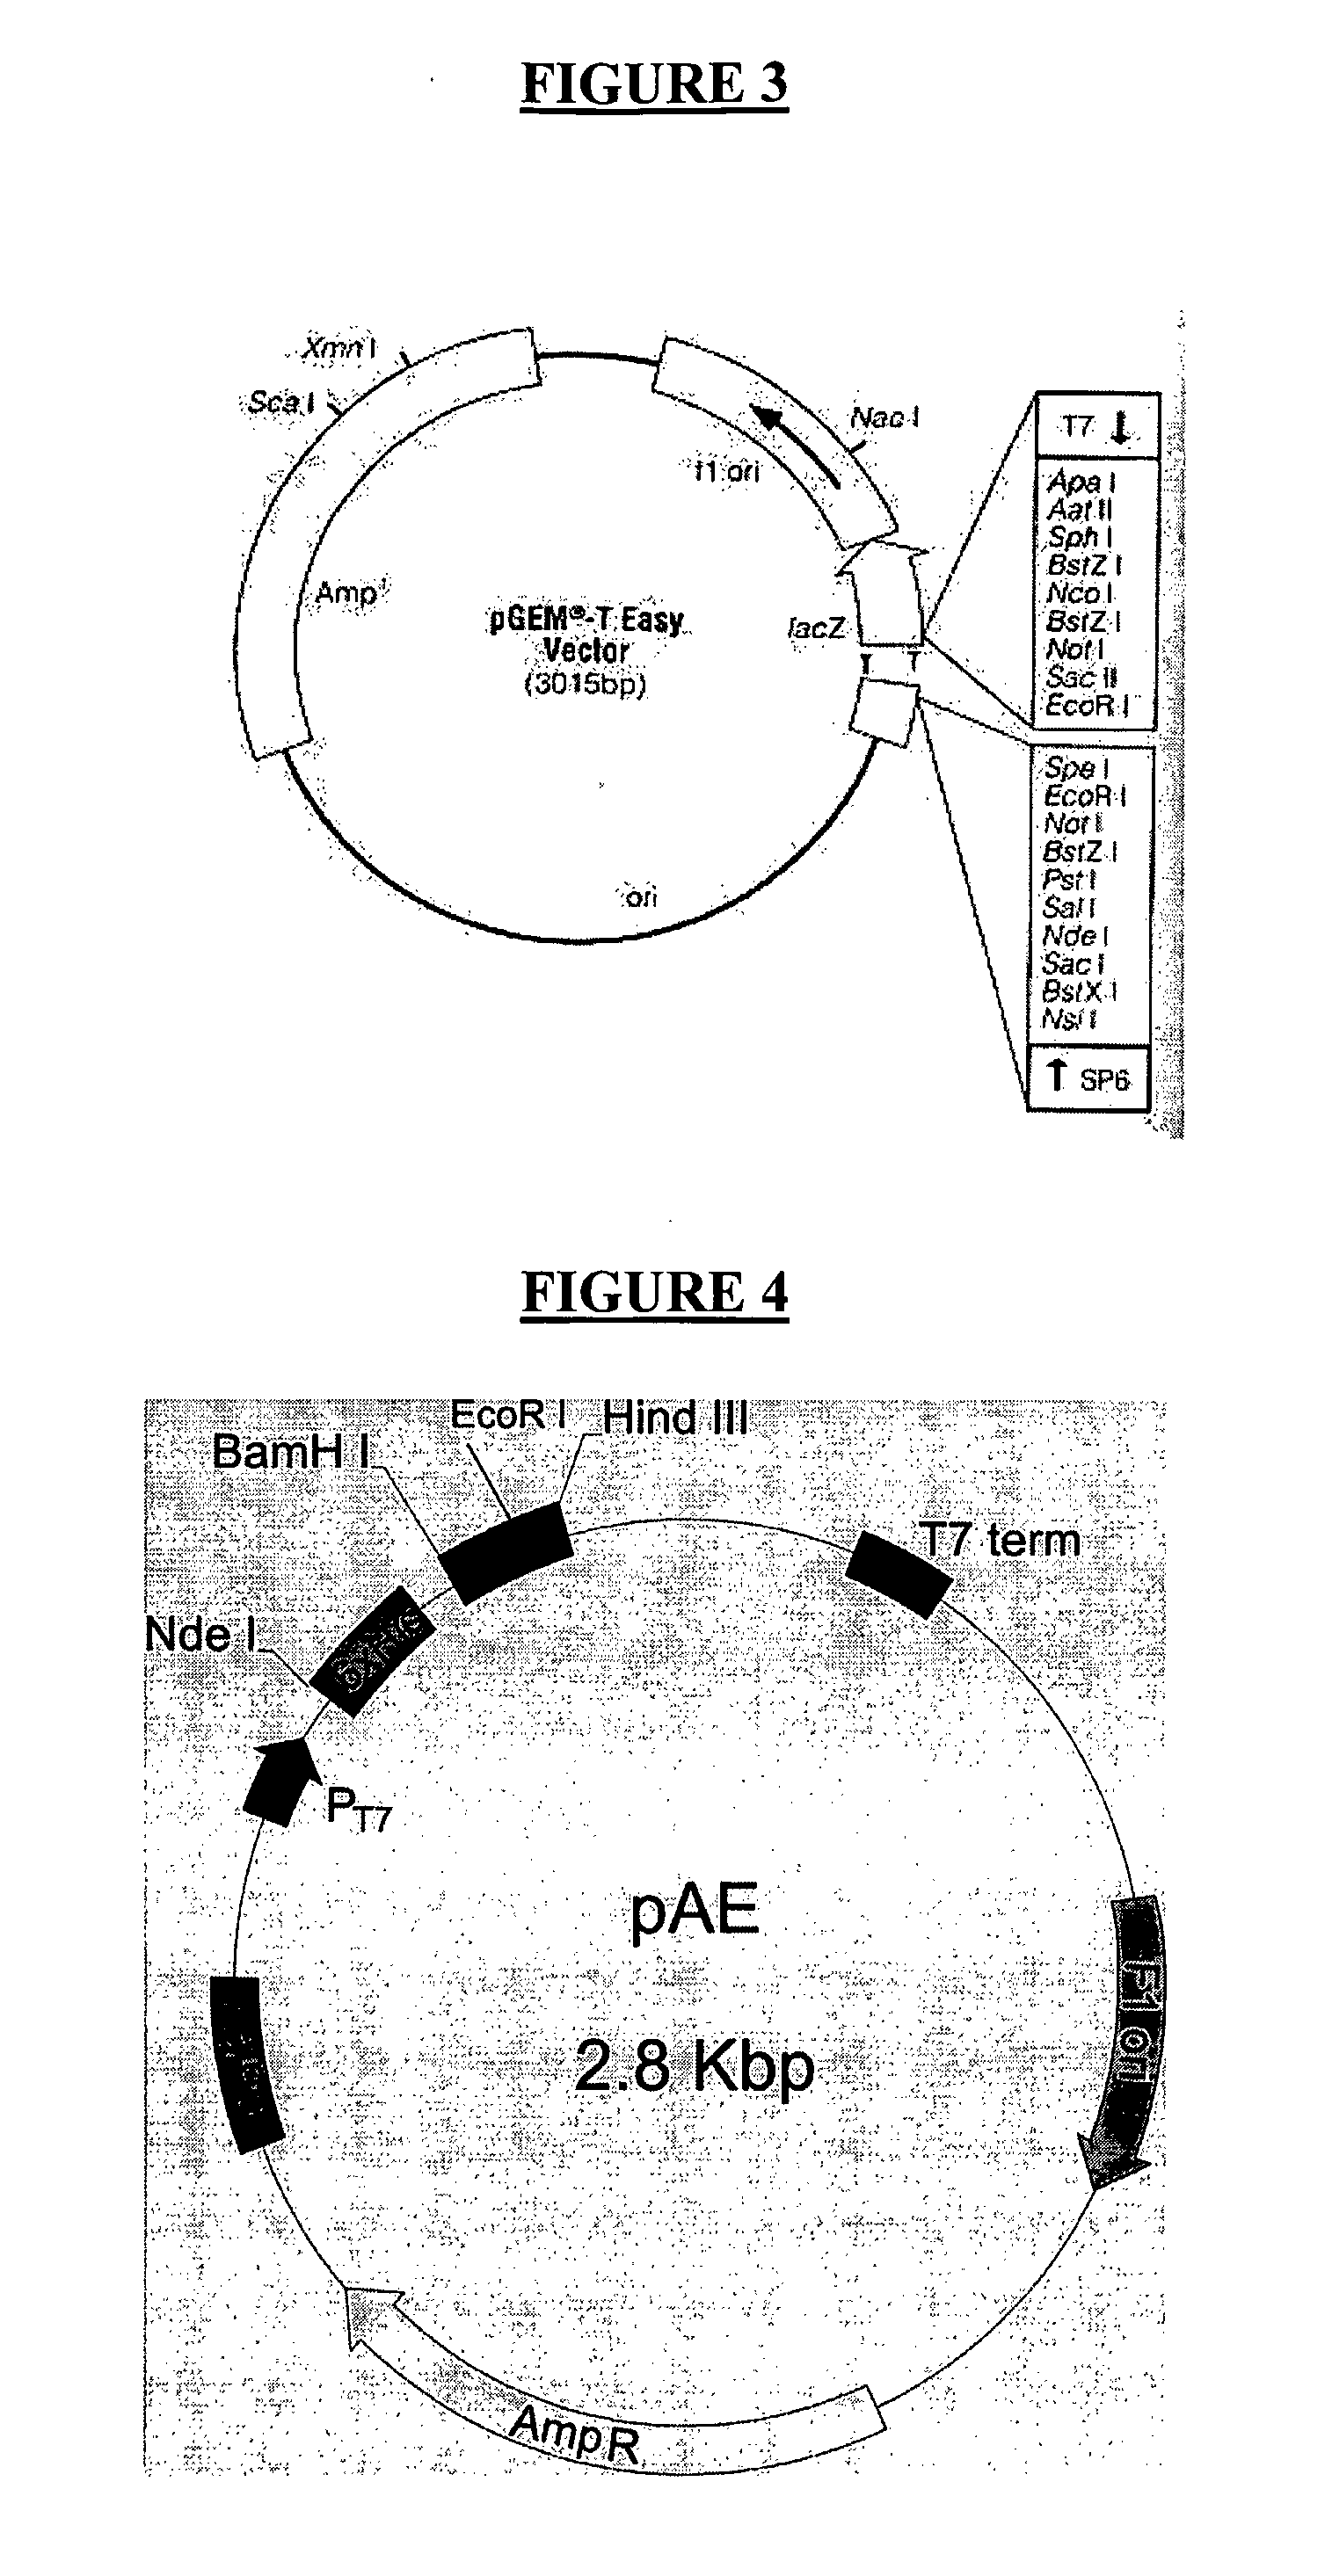 Process for Obtaining Recombinant Prothrombin Activating Protease (Rlopap) in Monomeric form; the Recombinant Prothrombin Activating Protease (Rlopap) as Well as its Amino Acid Sequence; the Use of this Protease as a Defibrinogenase